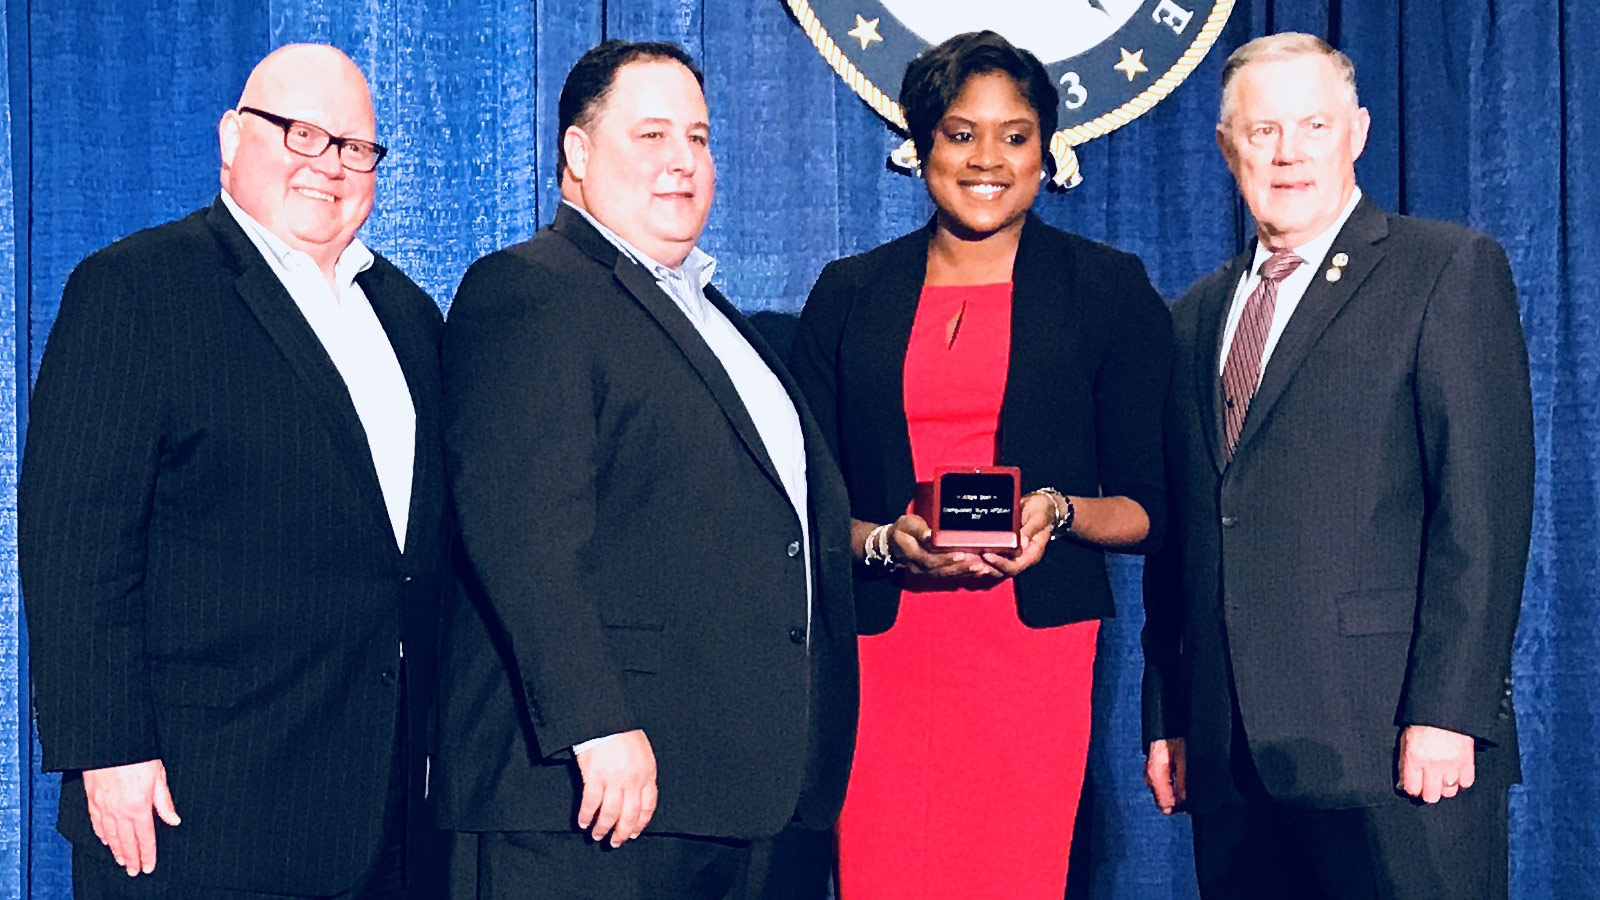 black woman with award standing with three men